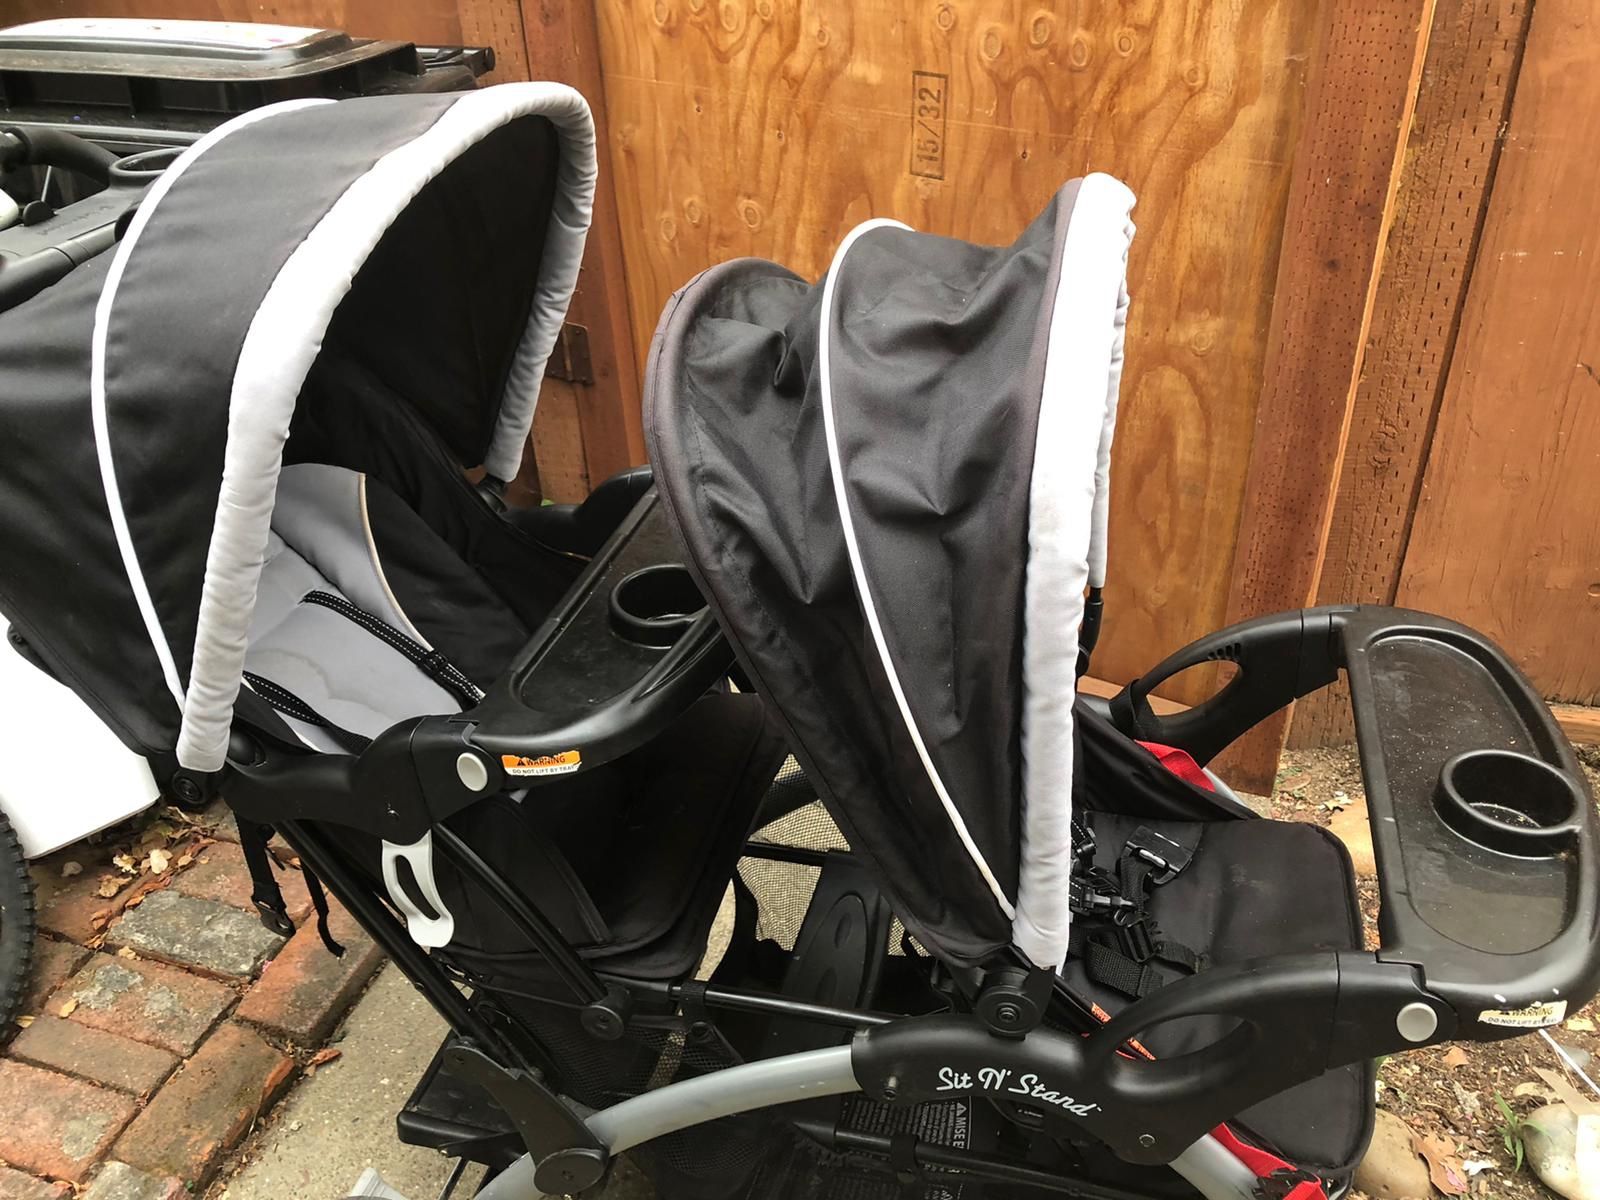 Stroller with 2 baby car seats